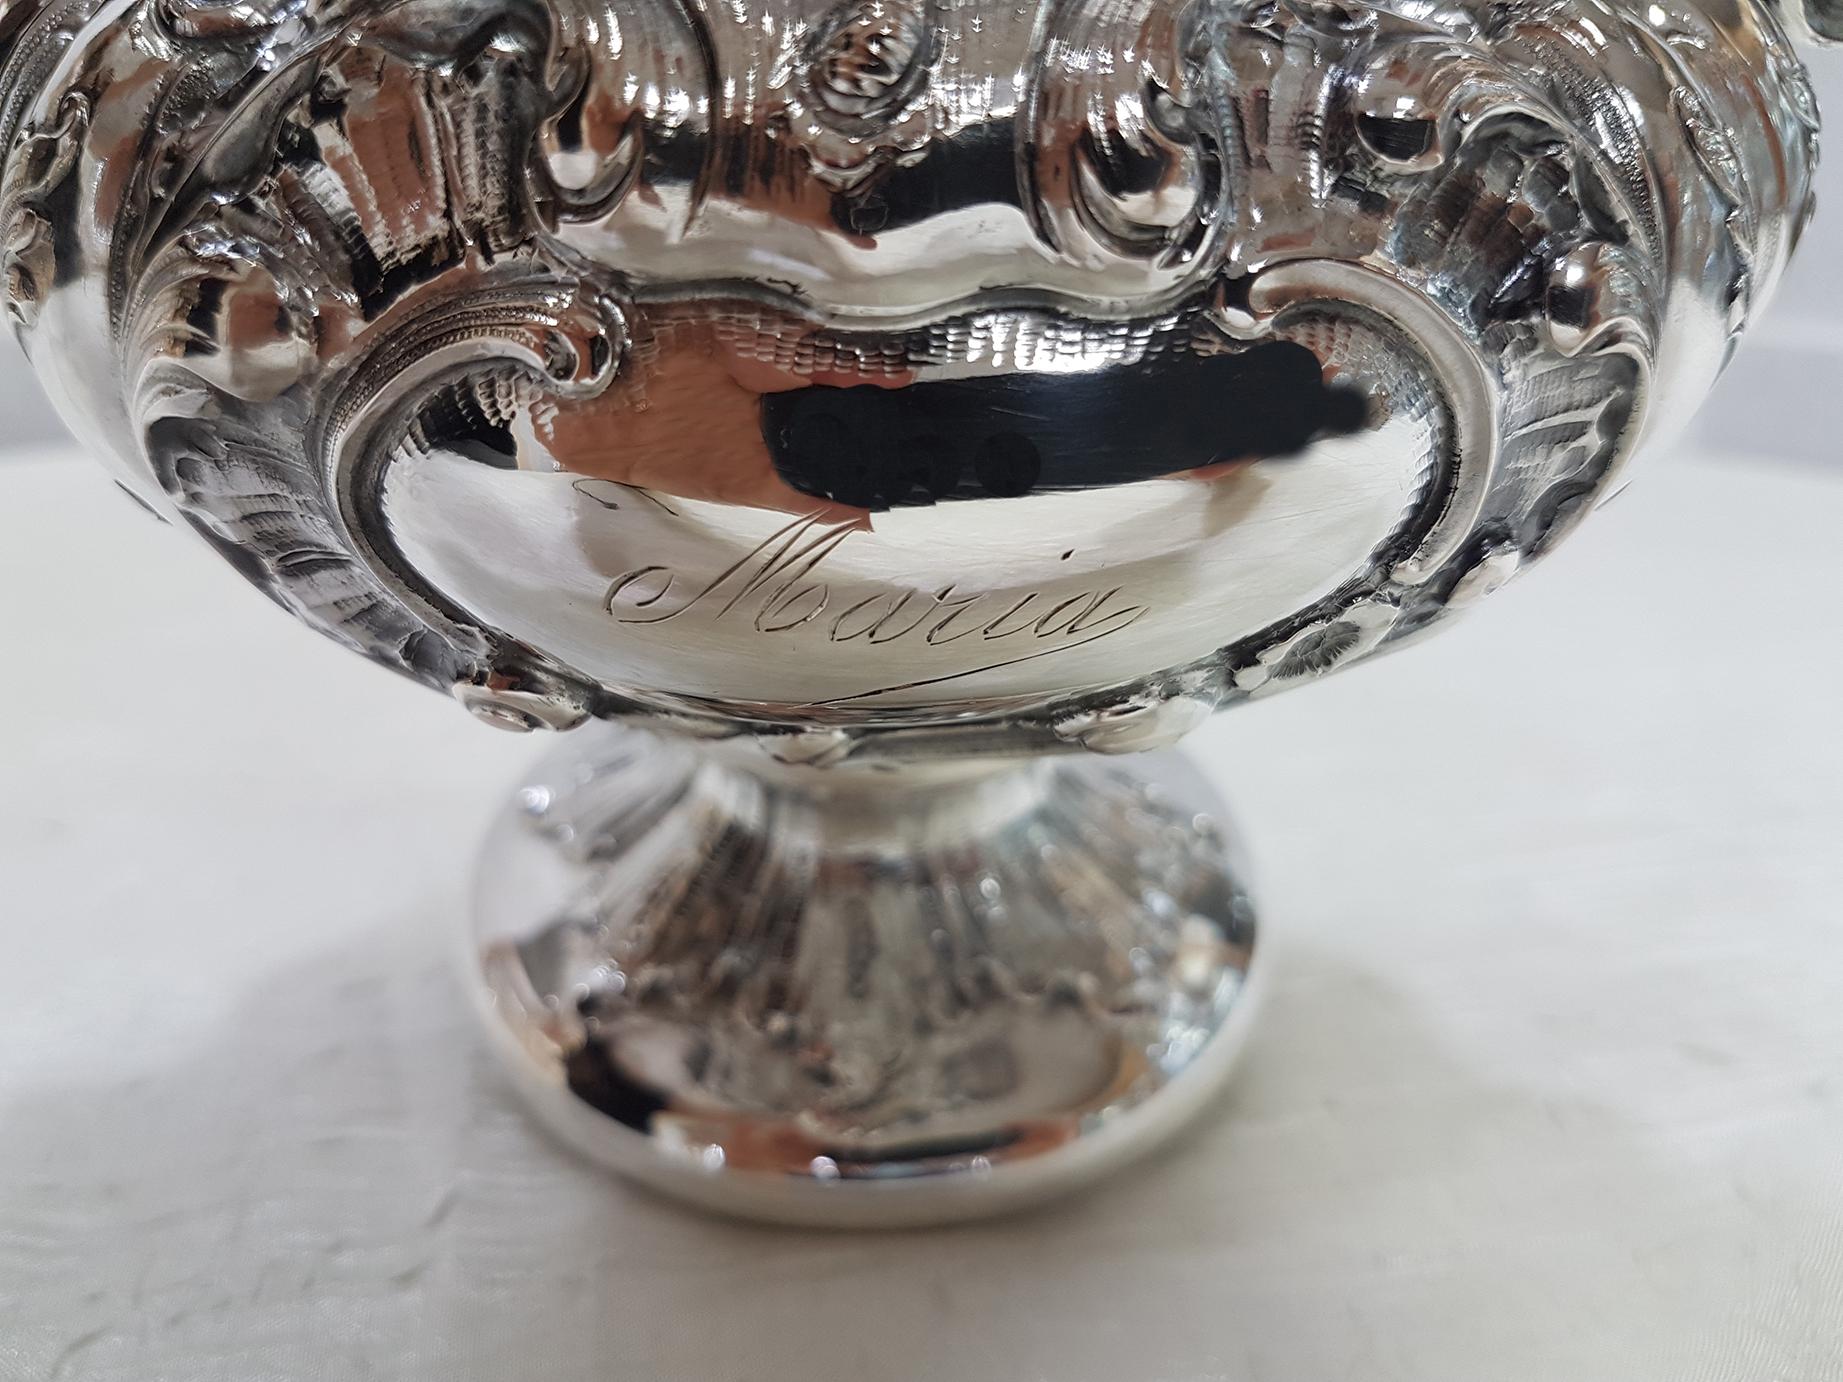 Gilt 19th Century Italian Silver Vase Barocco Style with Handles and Gilded Inside For Sale